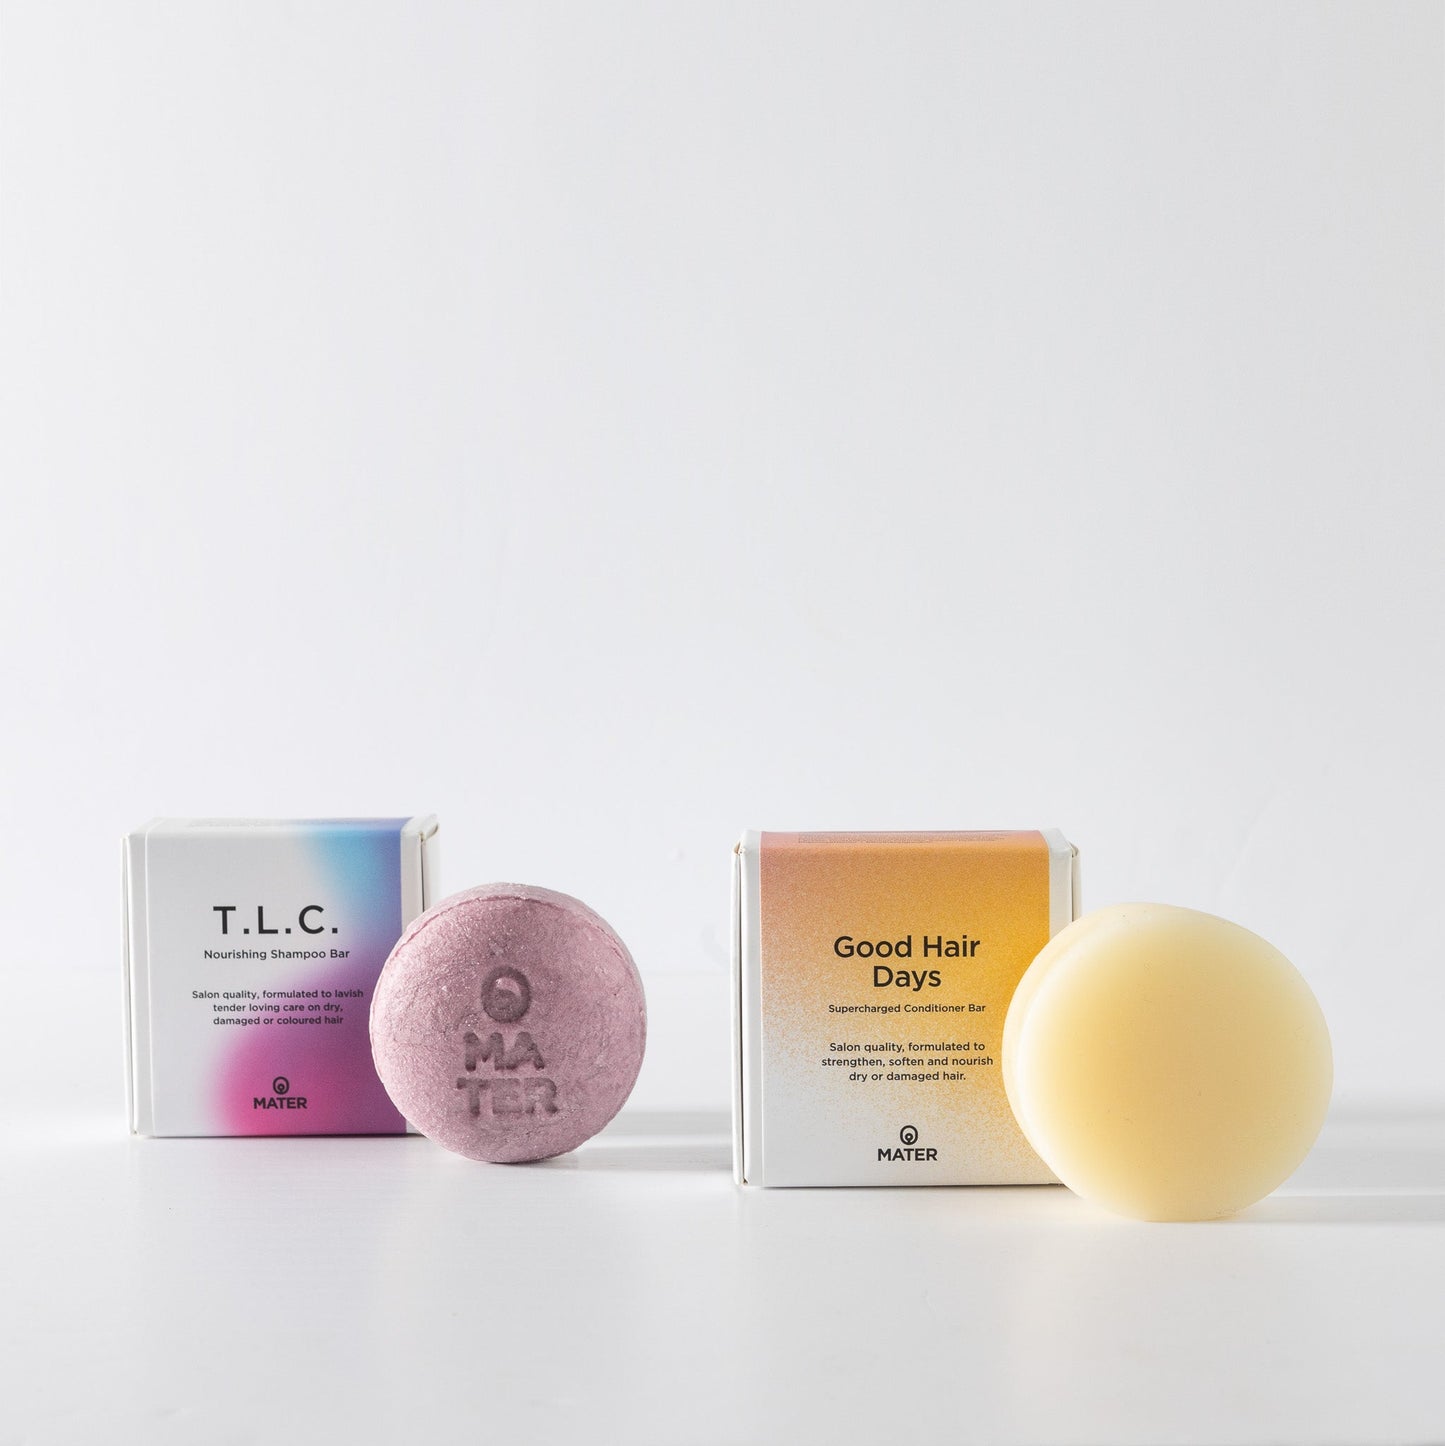 MATER Beauty HAIR Ritual set, T.L.C. Nourishing Shampoo Bar and GOOD HAIR DAYS, Supercharged Conditioner Bar. Two round pucks, pale purple and yellow, next to the cardboard boxes they come in.